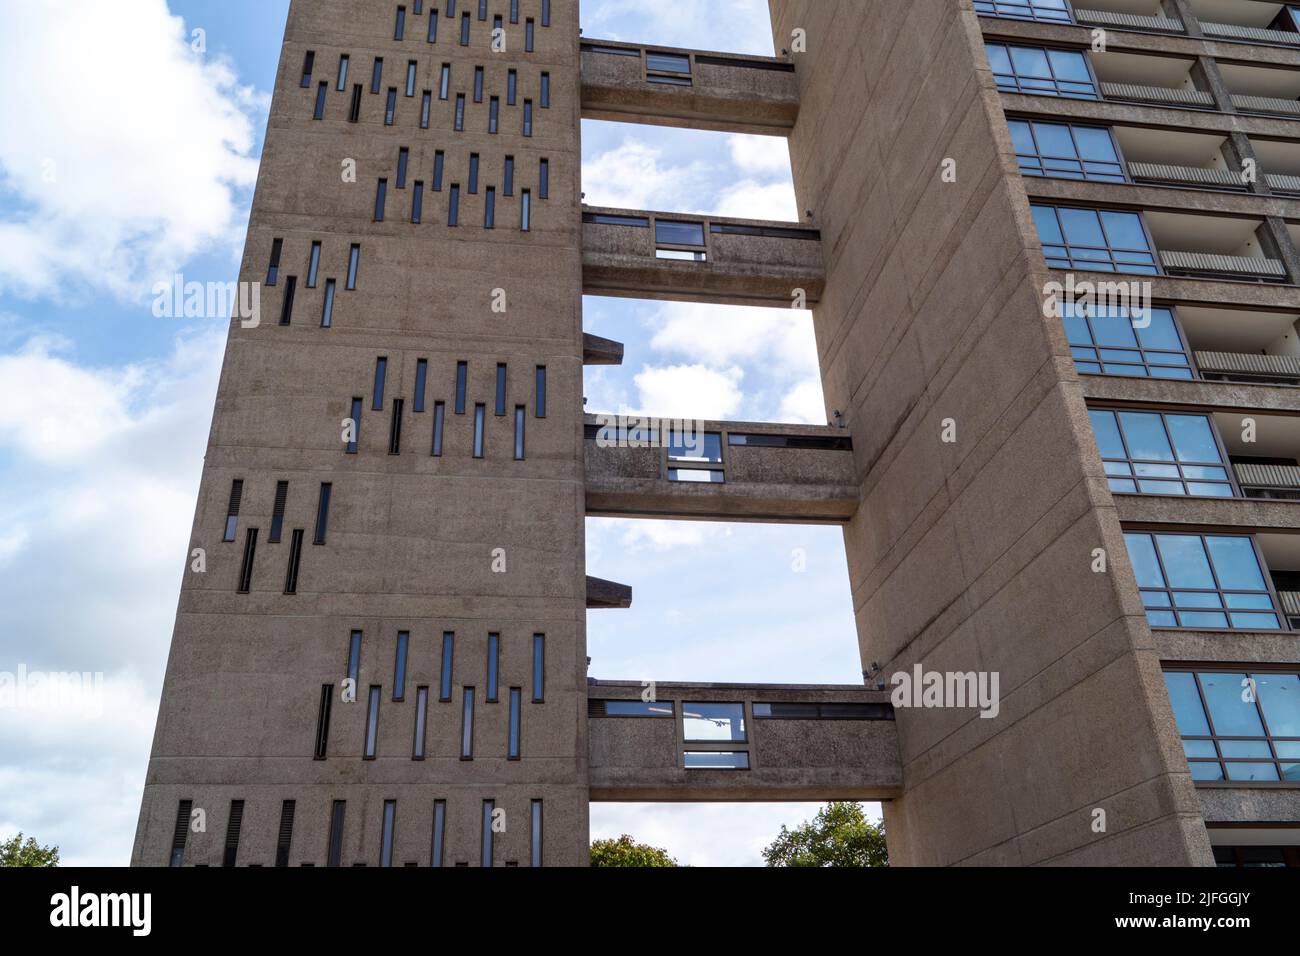 Balfron Tower, Brutalist high-rise tower block by architect, Erno Goldfinger, situated in Poplar, Tower Hamlets, East London, UK. Stock Photo